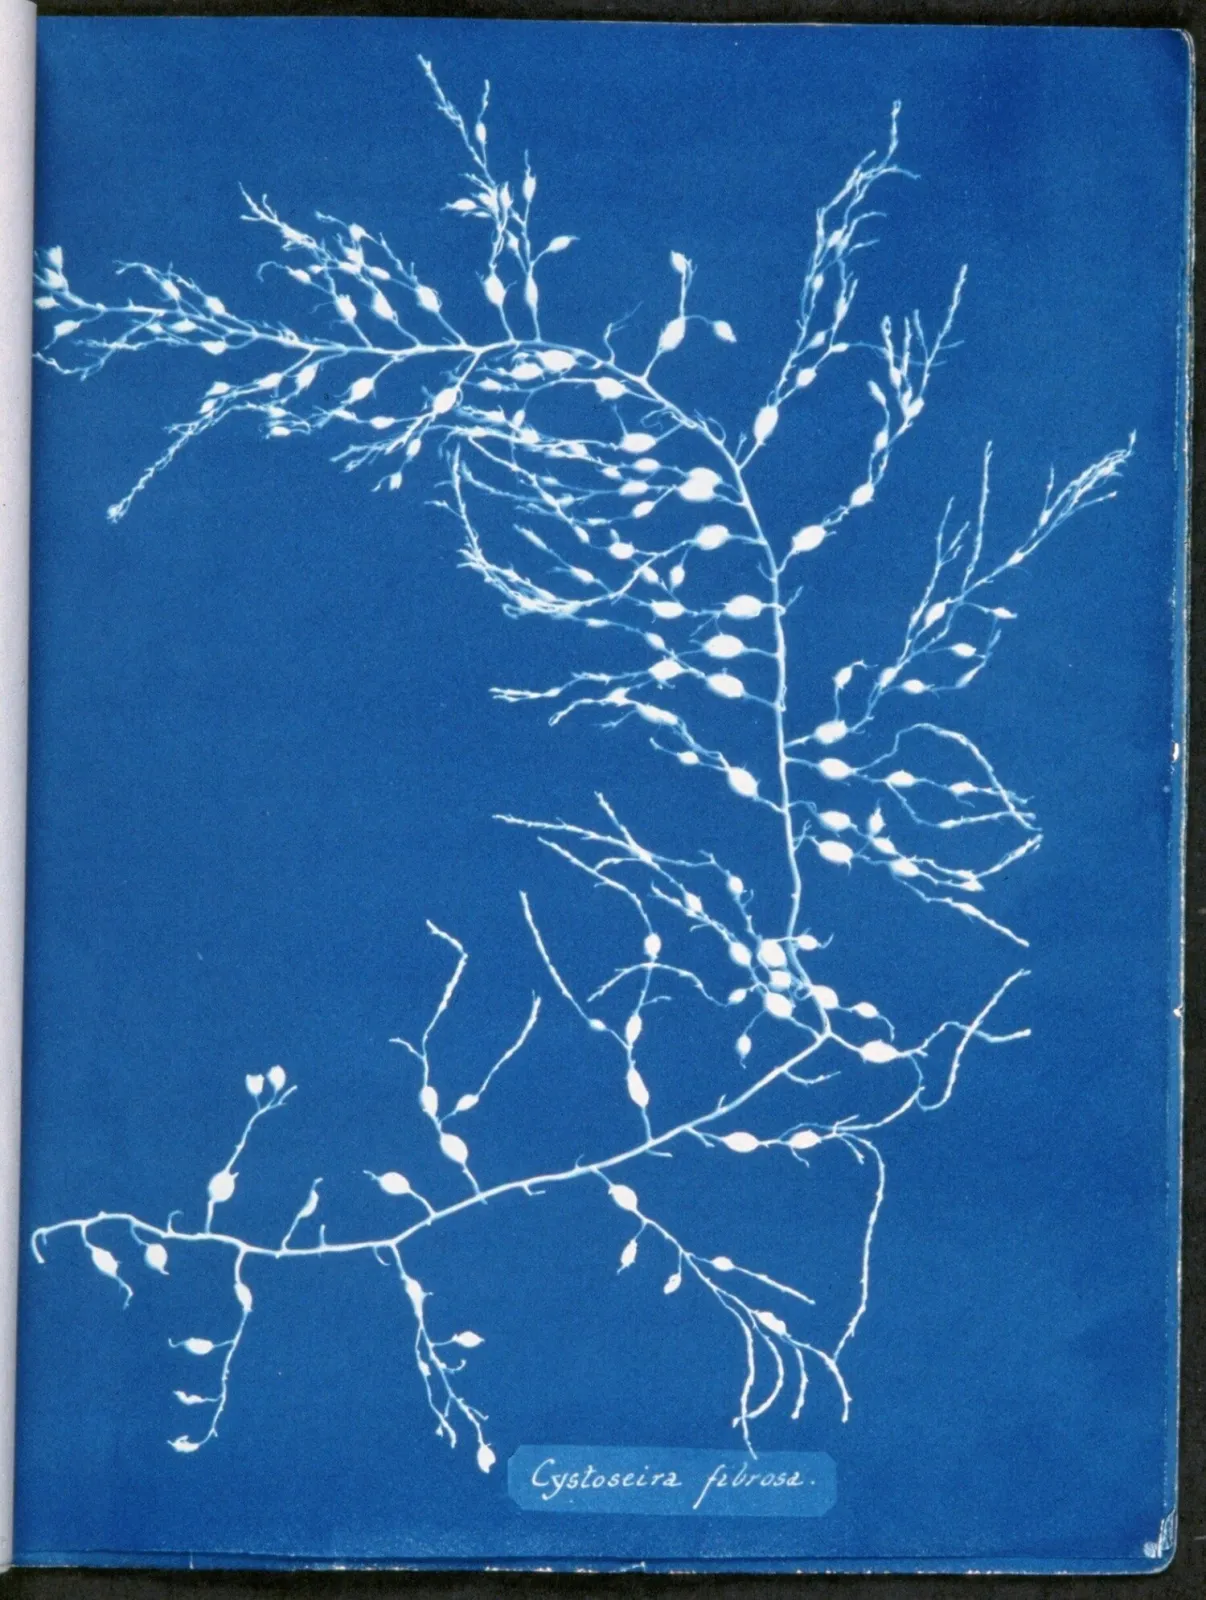 White image of feathery algae on a bright blue background created using the cyanotype process.